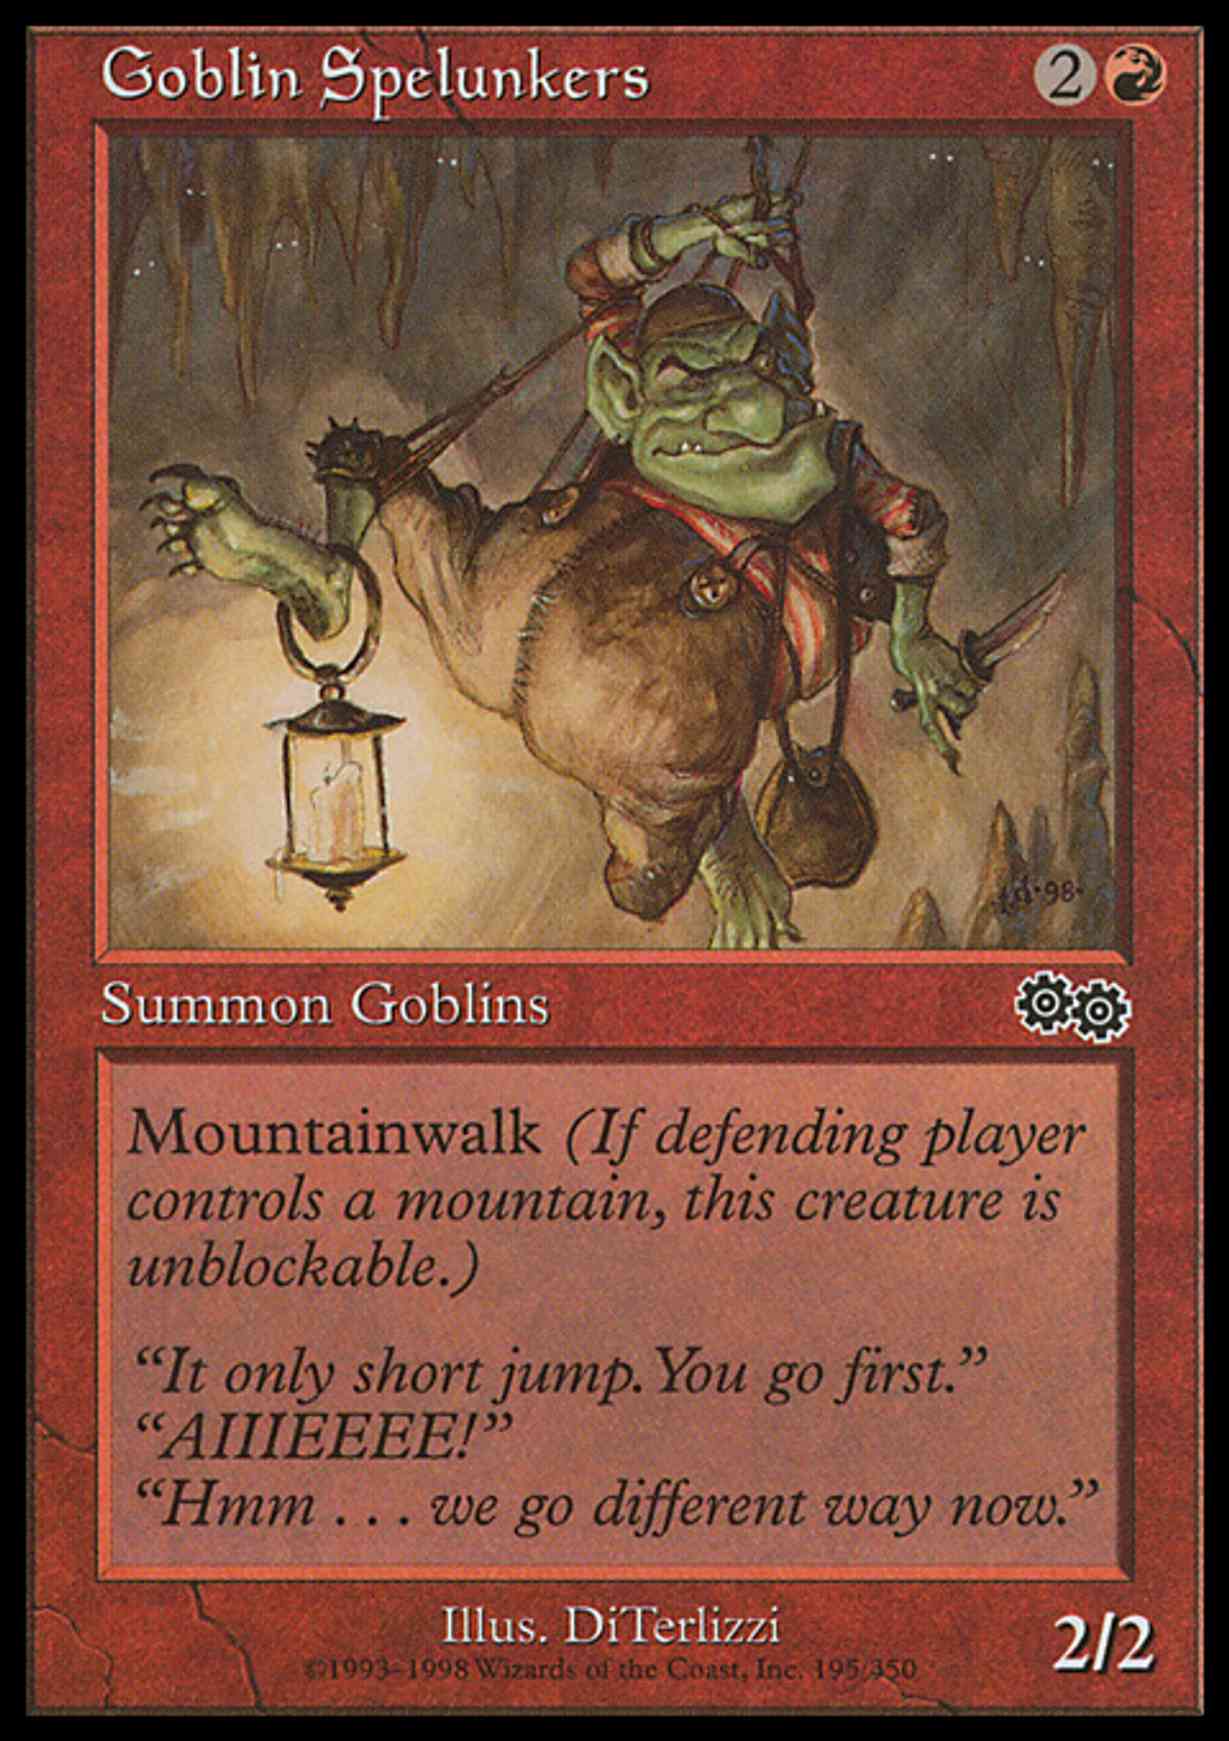 Goblin Spelunkers magic card front